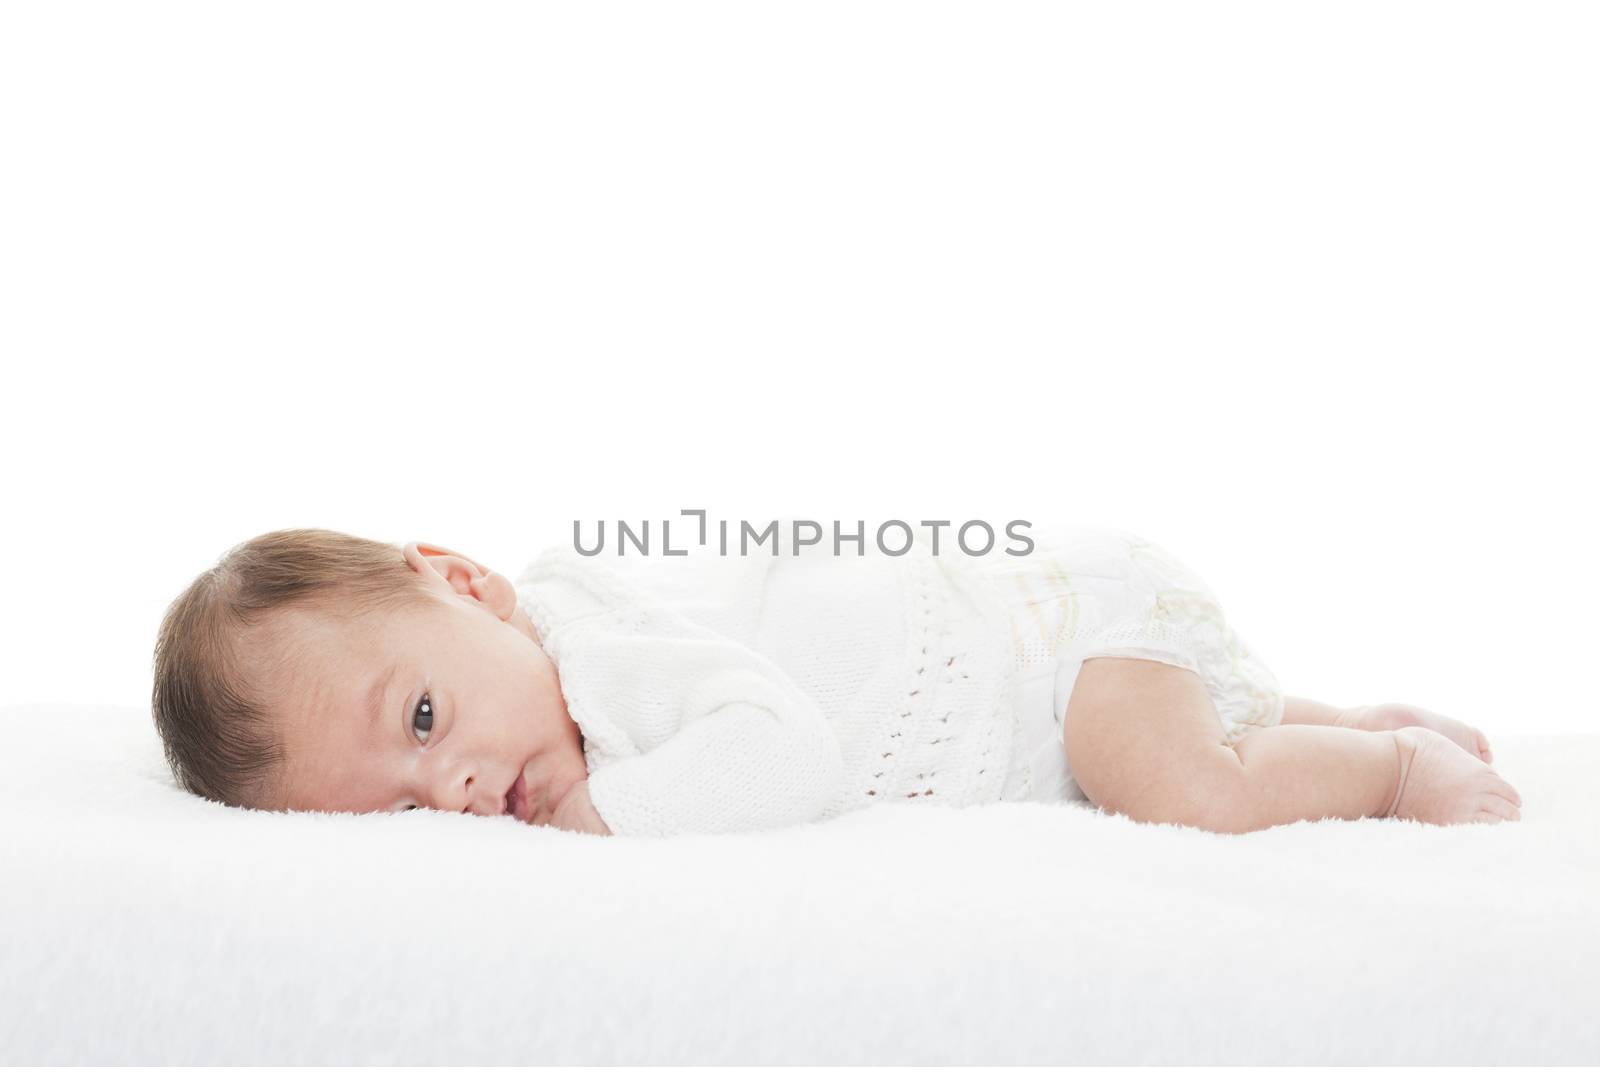 A mixed race newborn baby boy staring at the camera.  Shot on white background.